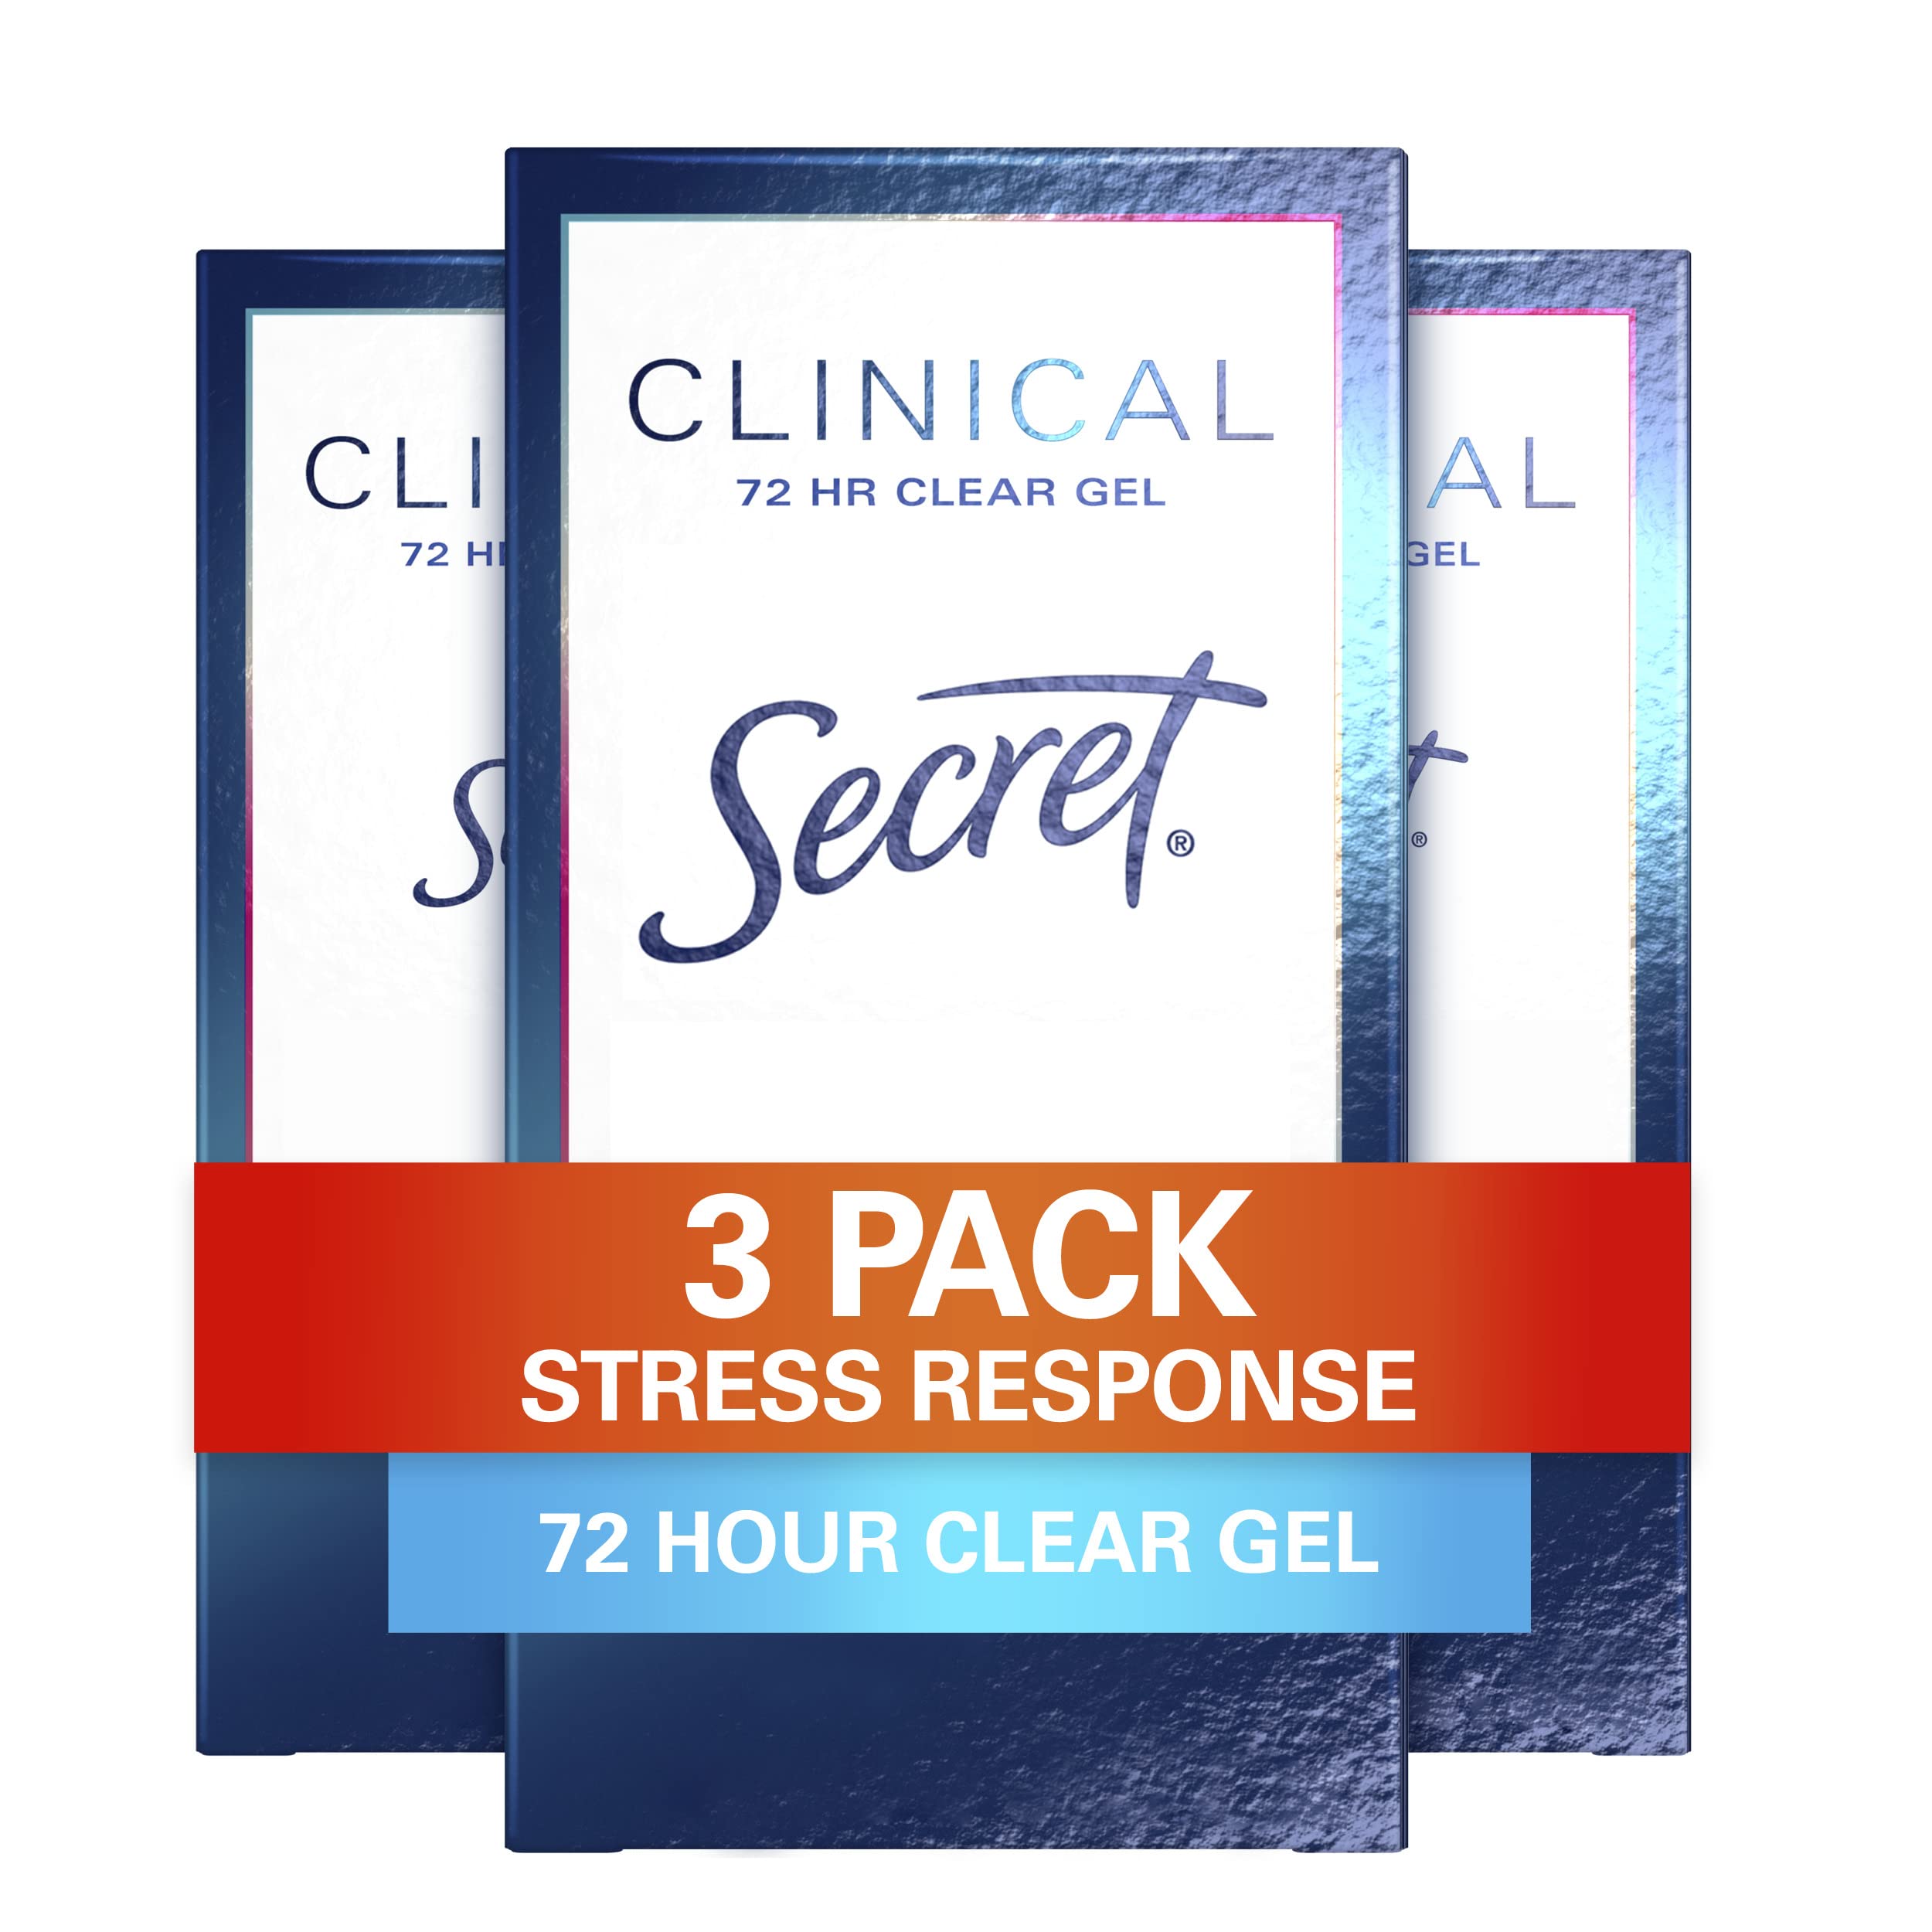 Secret Clinical Strength Clear Gel Antiperspirant and Deodorant, Stress Response, 1.6 oz (Pack of 3)